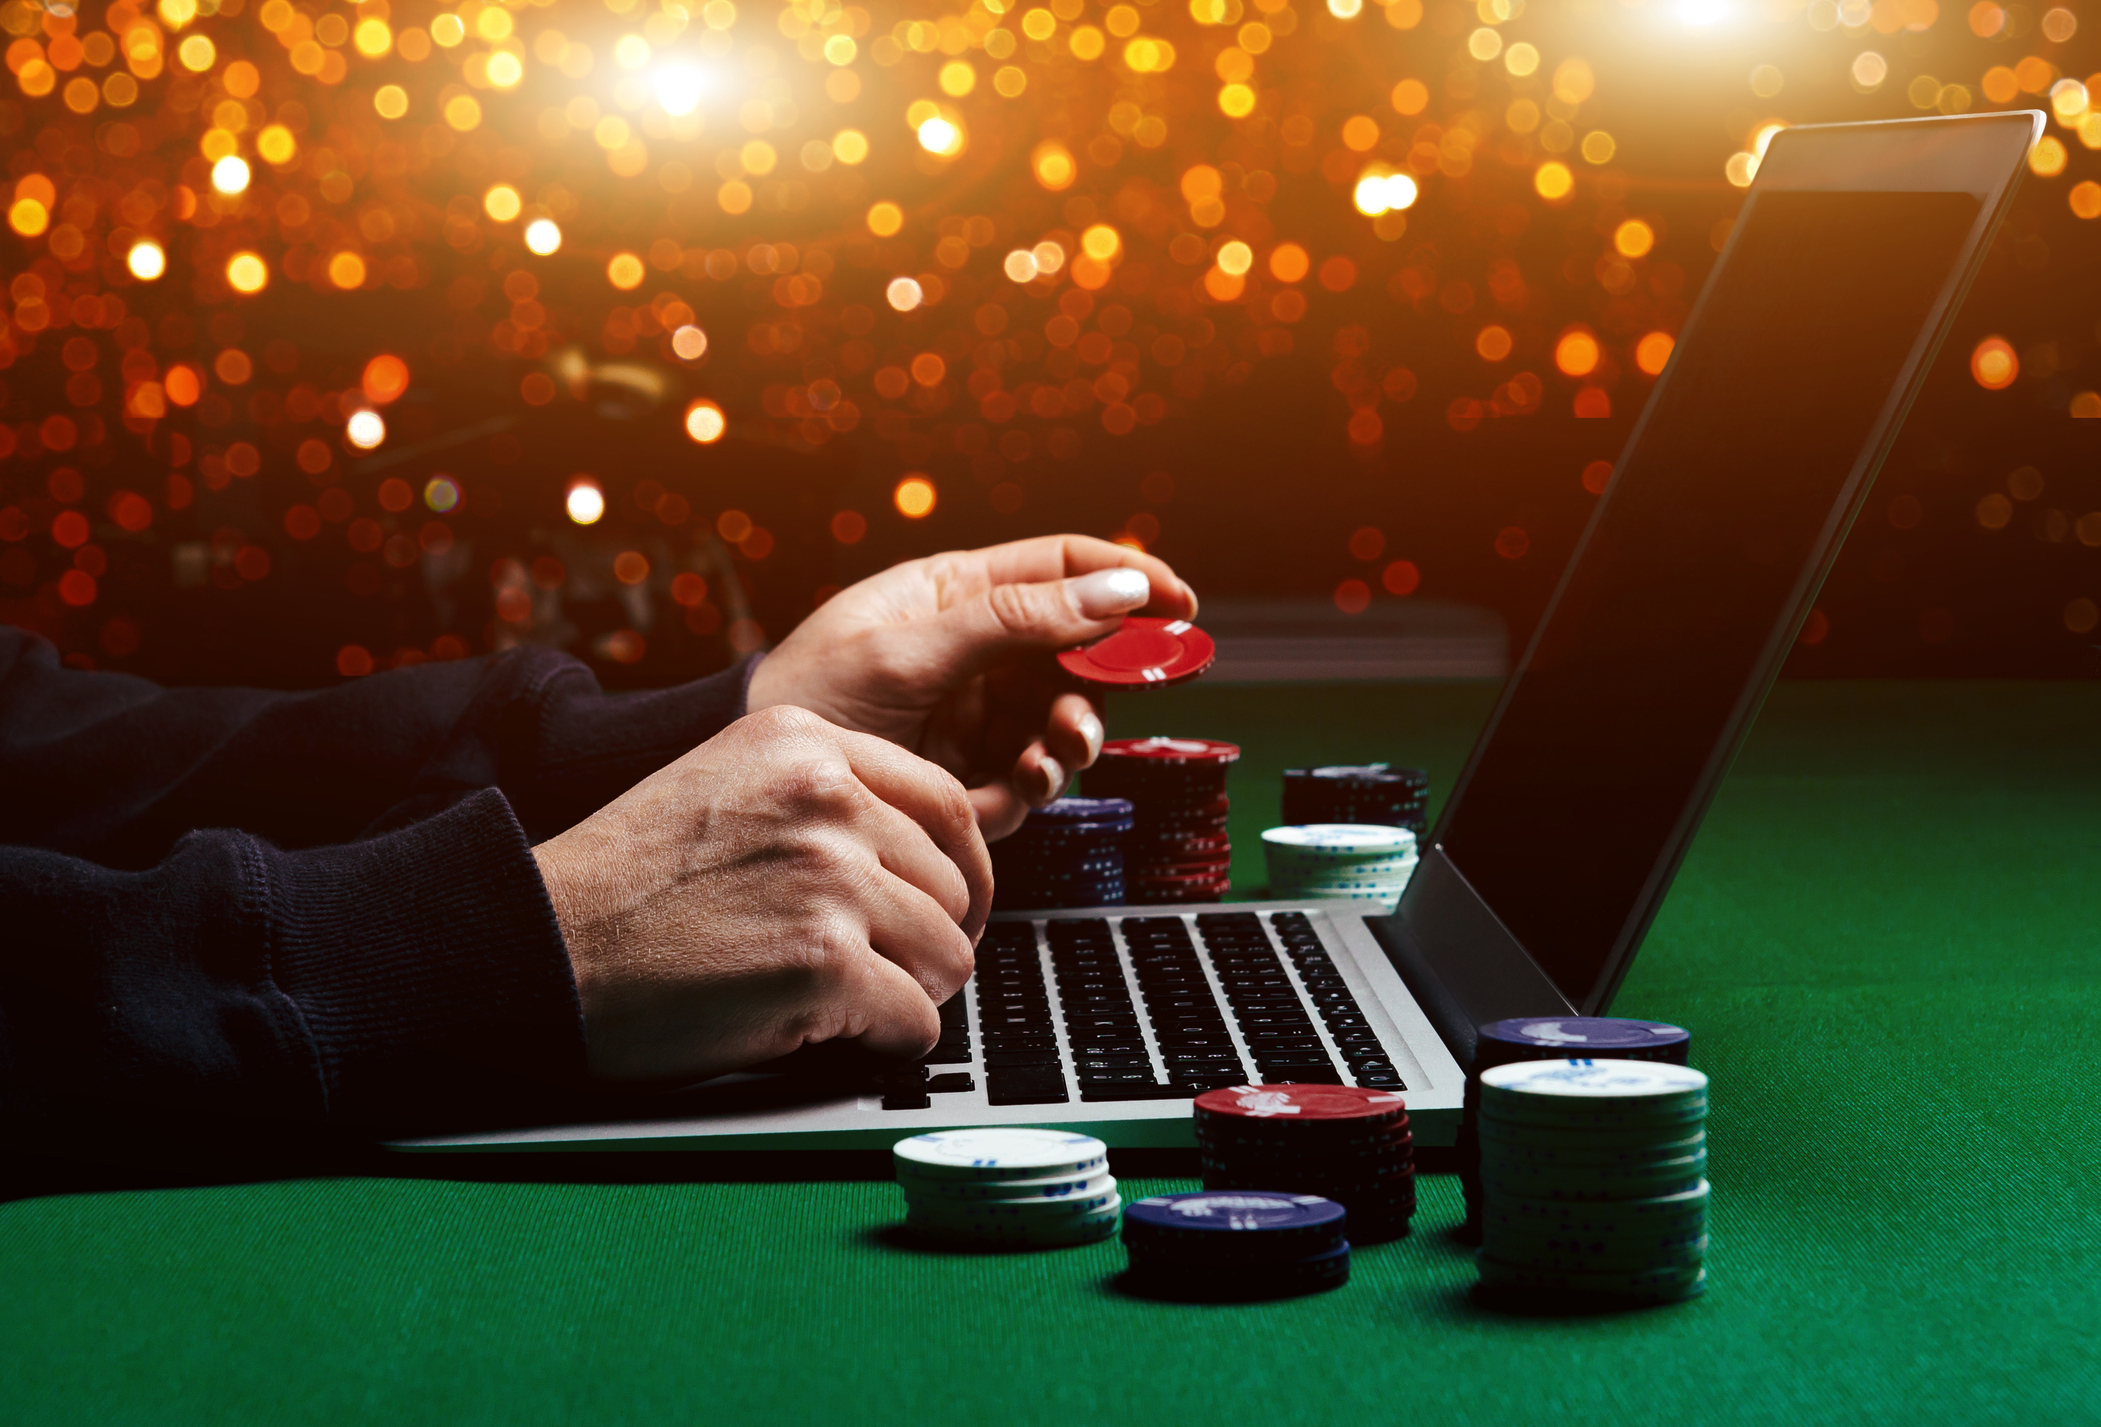 weepstakes Casinos vs. Traditional Online Casinos